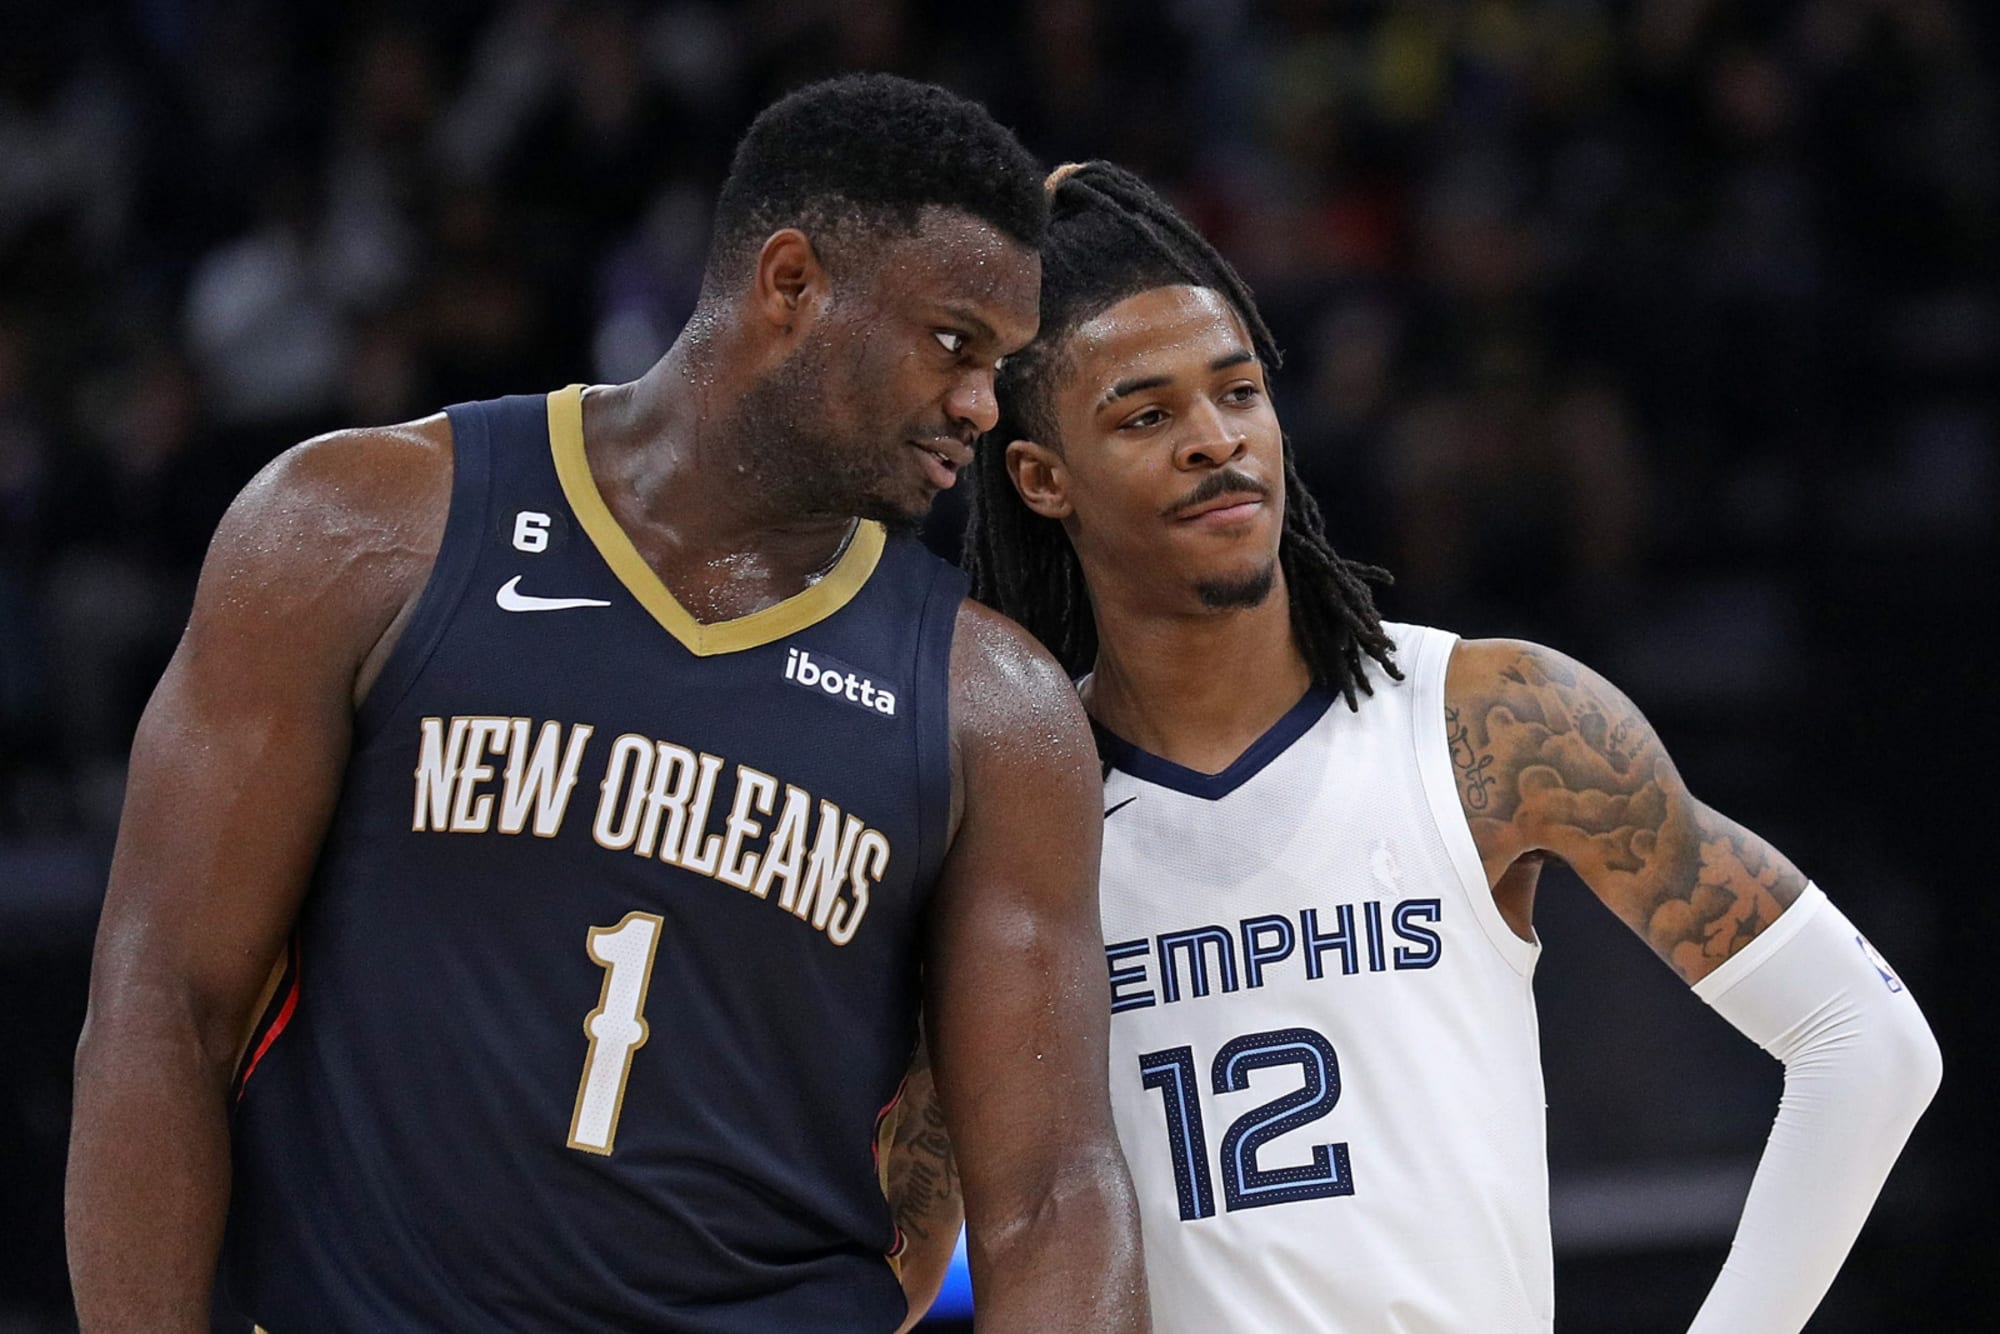 Ja Morant could return to Grizzlies to face Pelicans